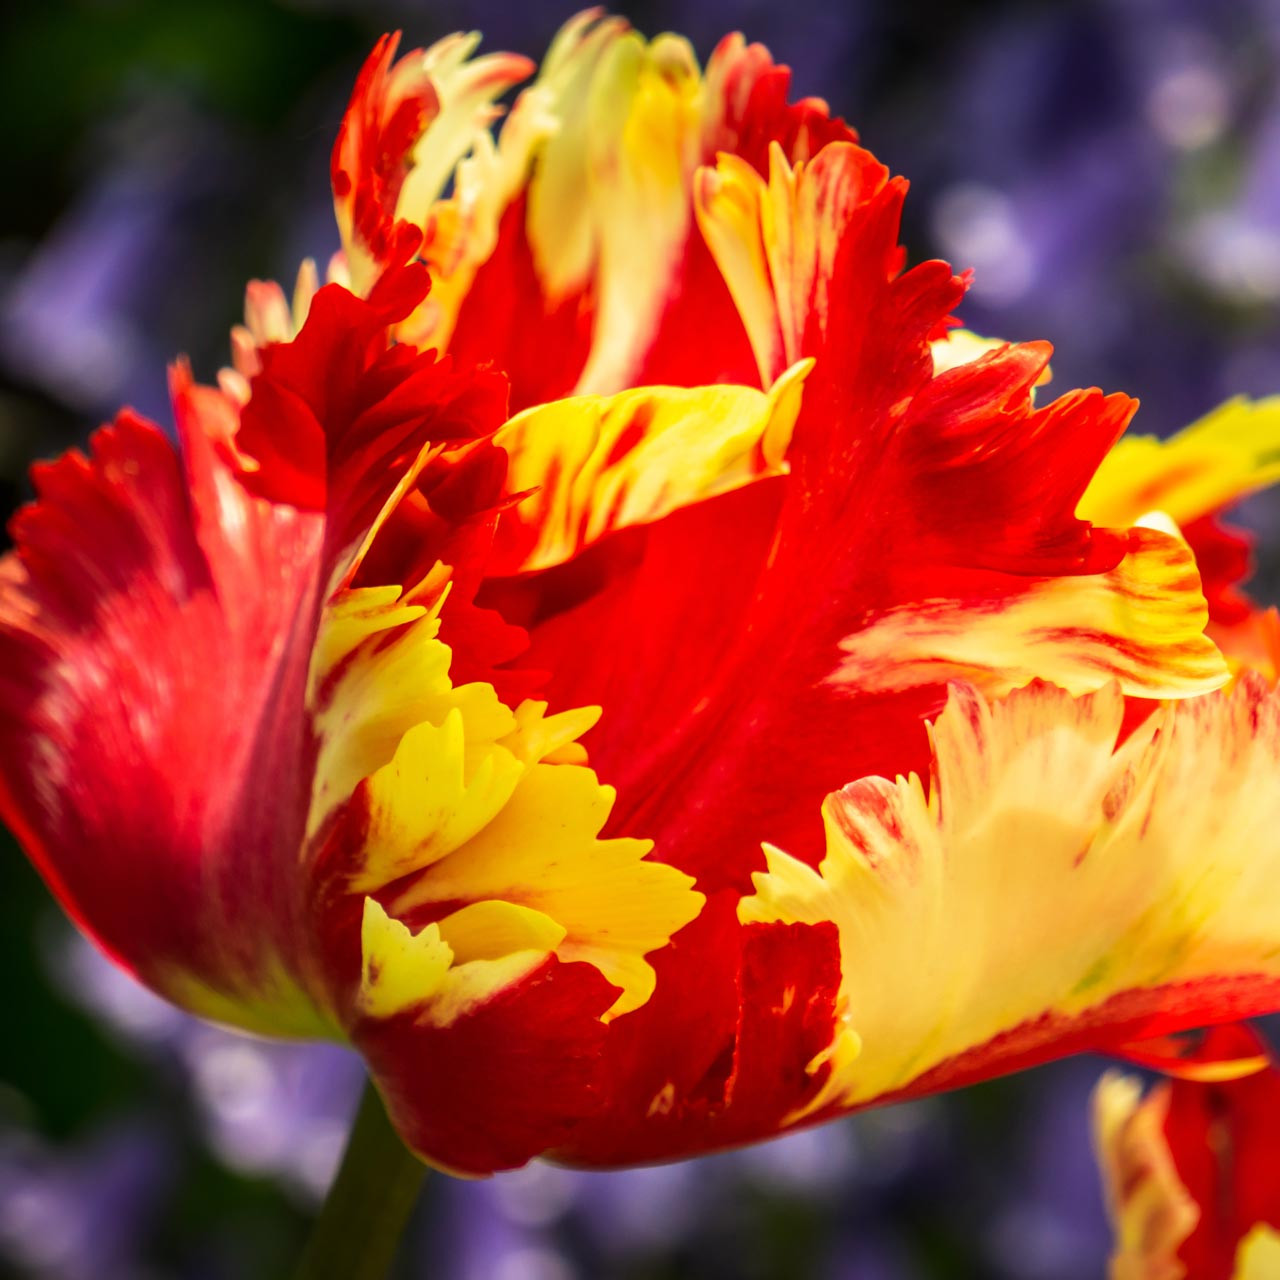 Flaming Parrot Tulip (Tulipa) - October Delivery